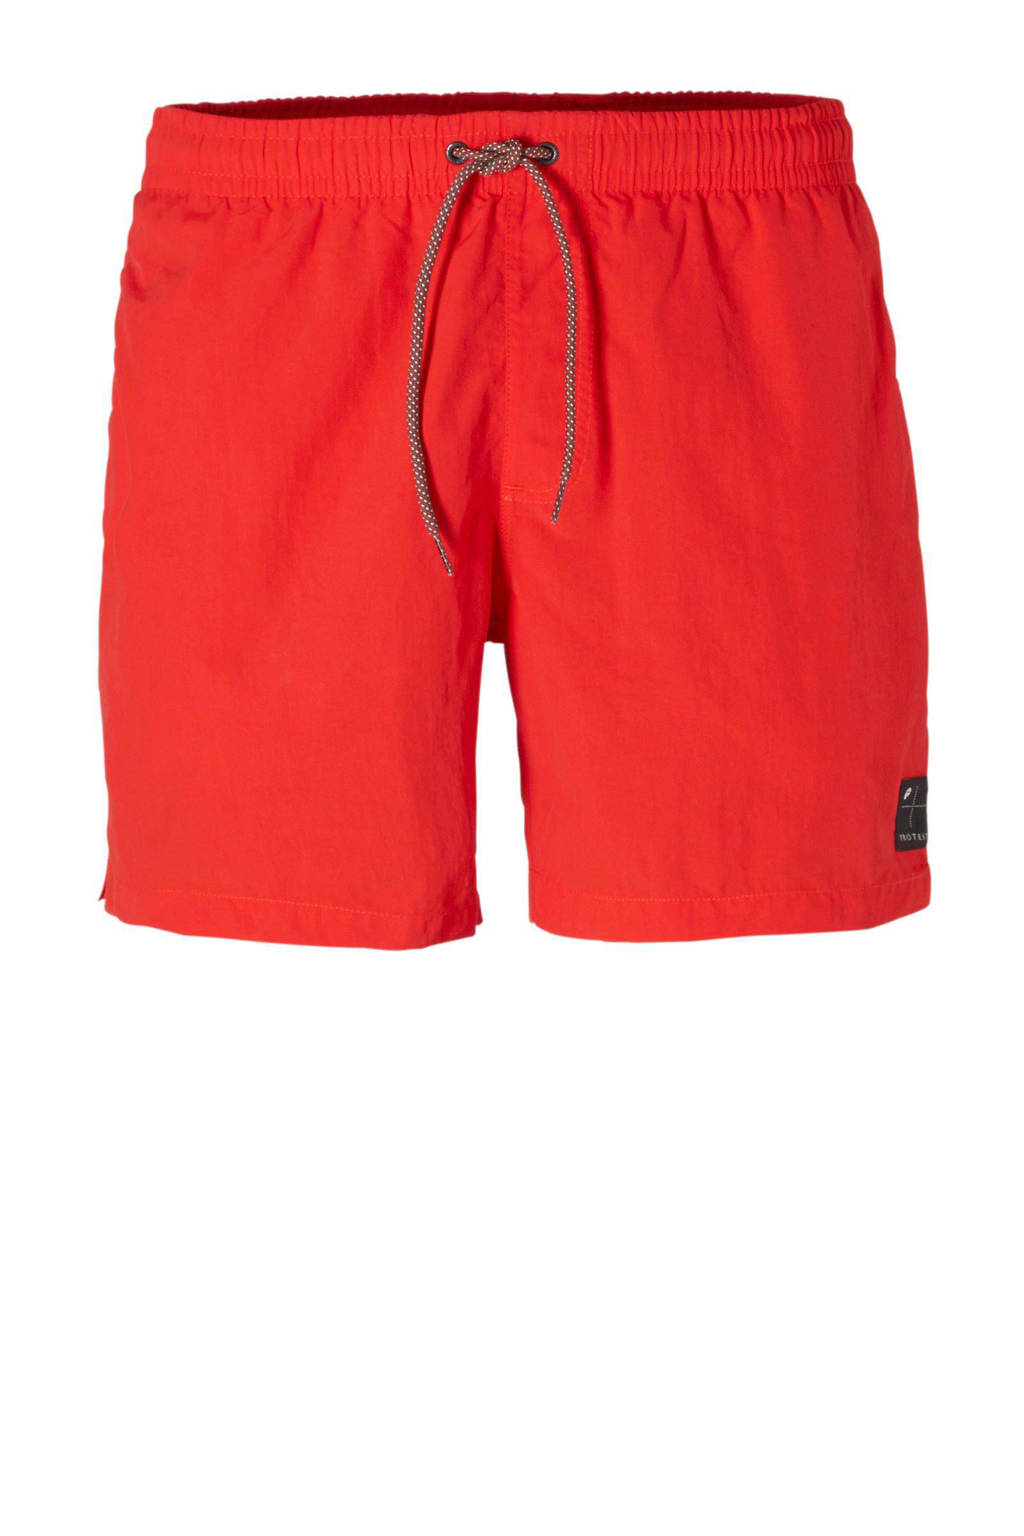 Protest zwemshort, Rood